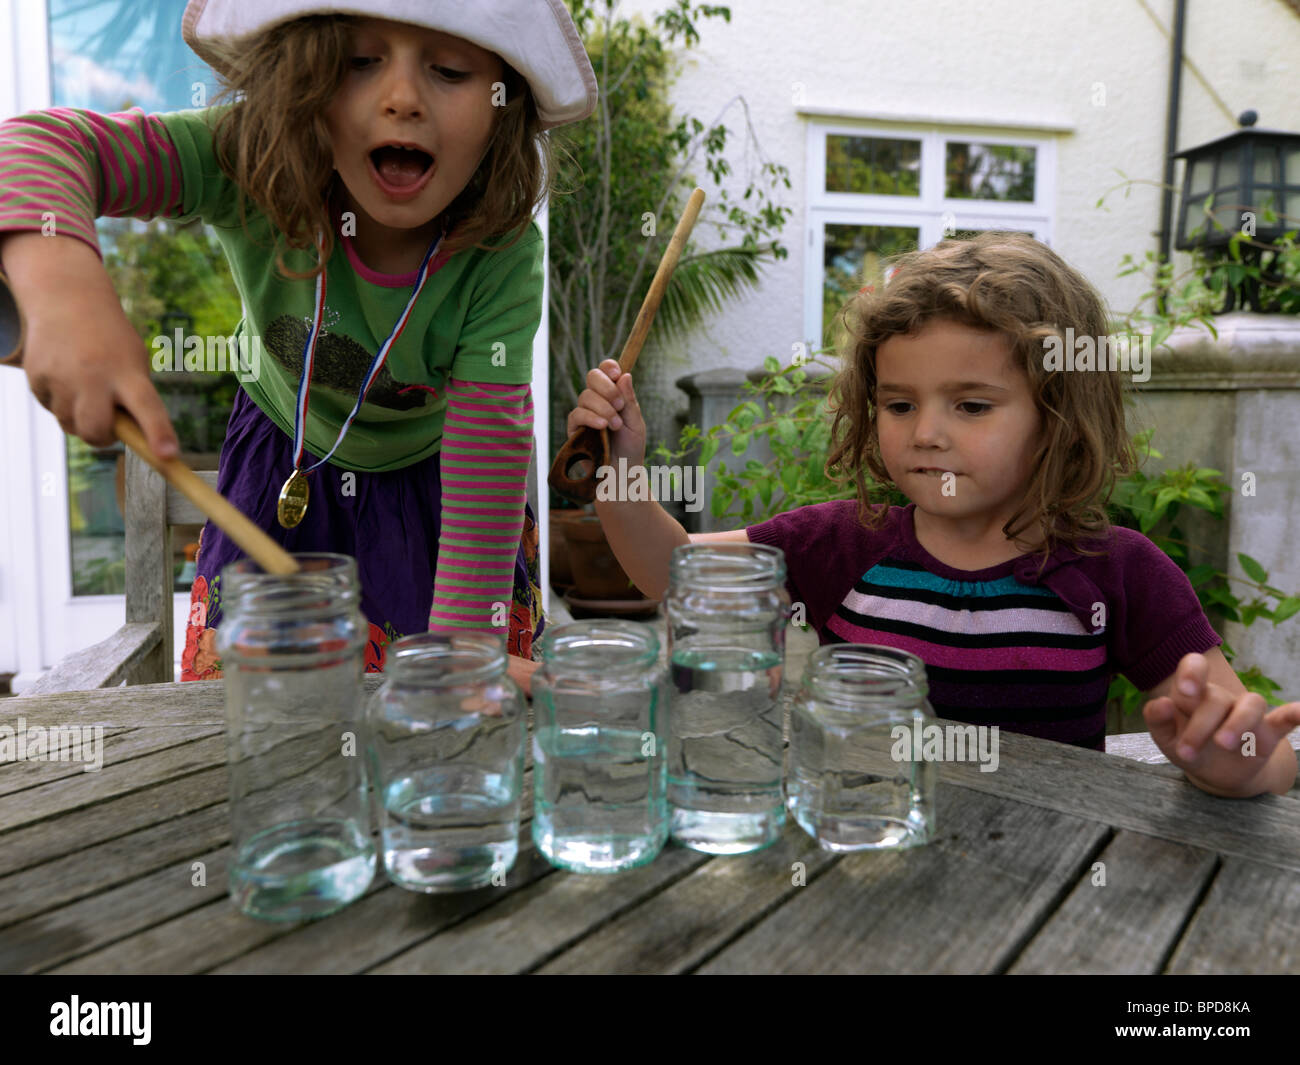 Girls Making Music Using Glass Jars Full Of Water And Hitting Them With Wooden Spoons Stock Photo